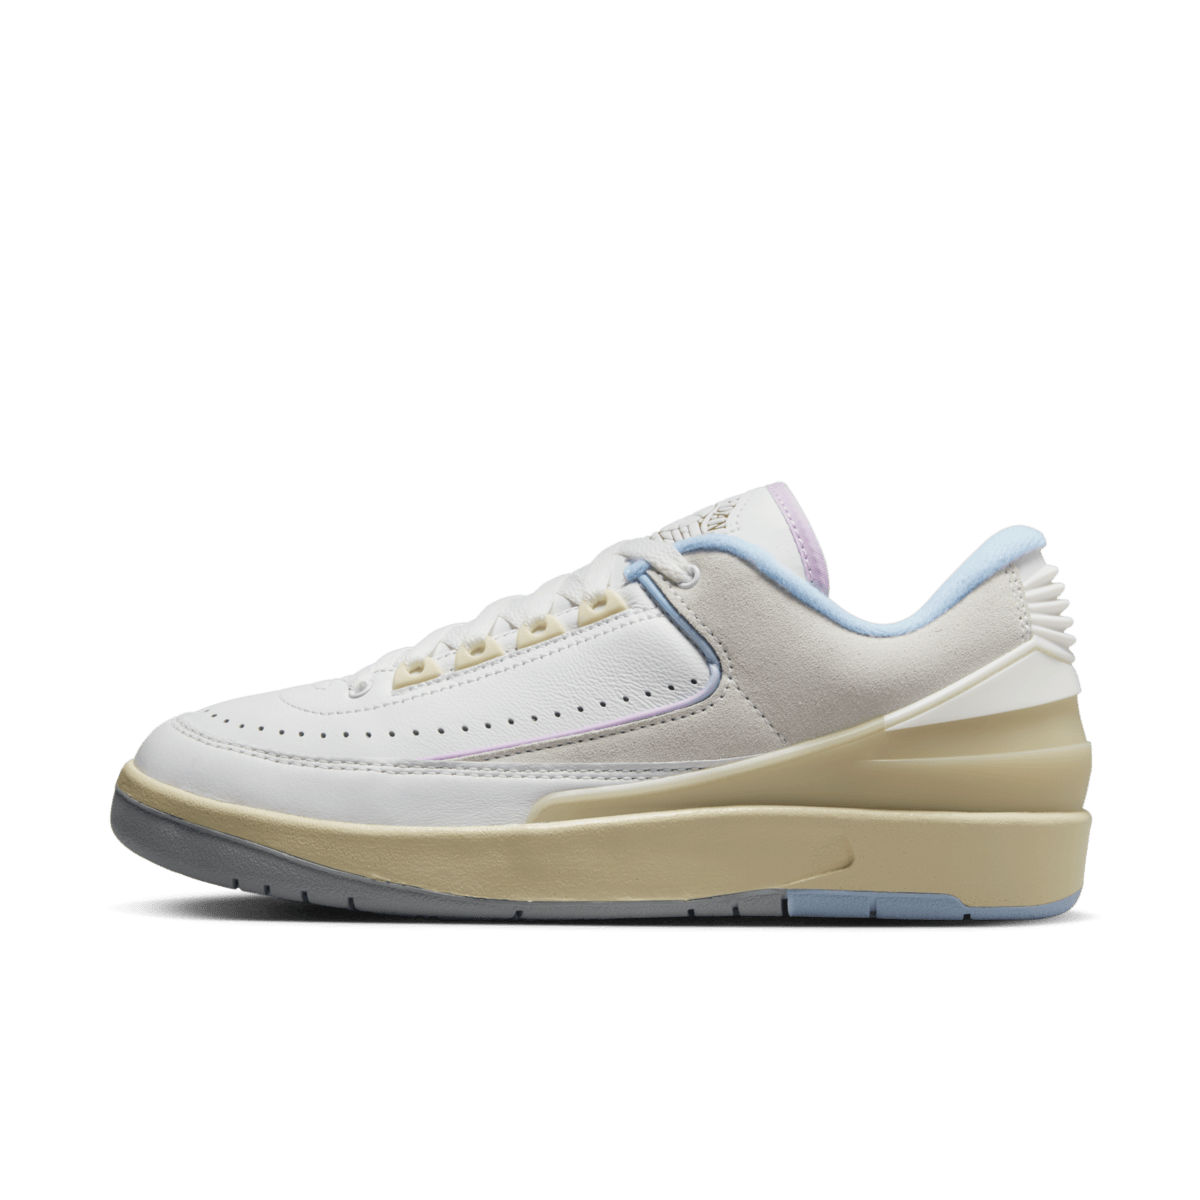 Air Jordan 2 Retro Low WMNS 'Up in the Air' DX4401-146